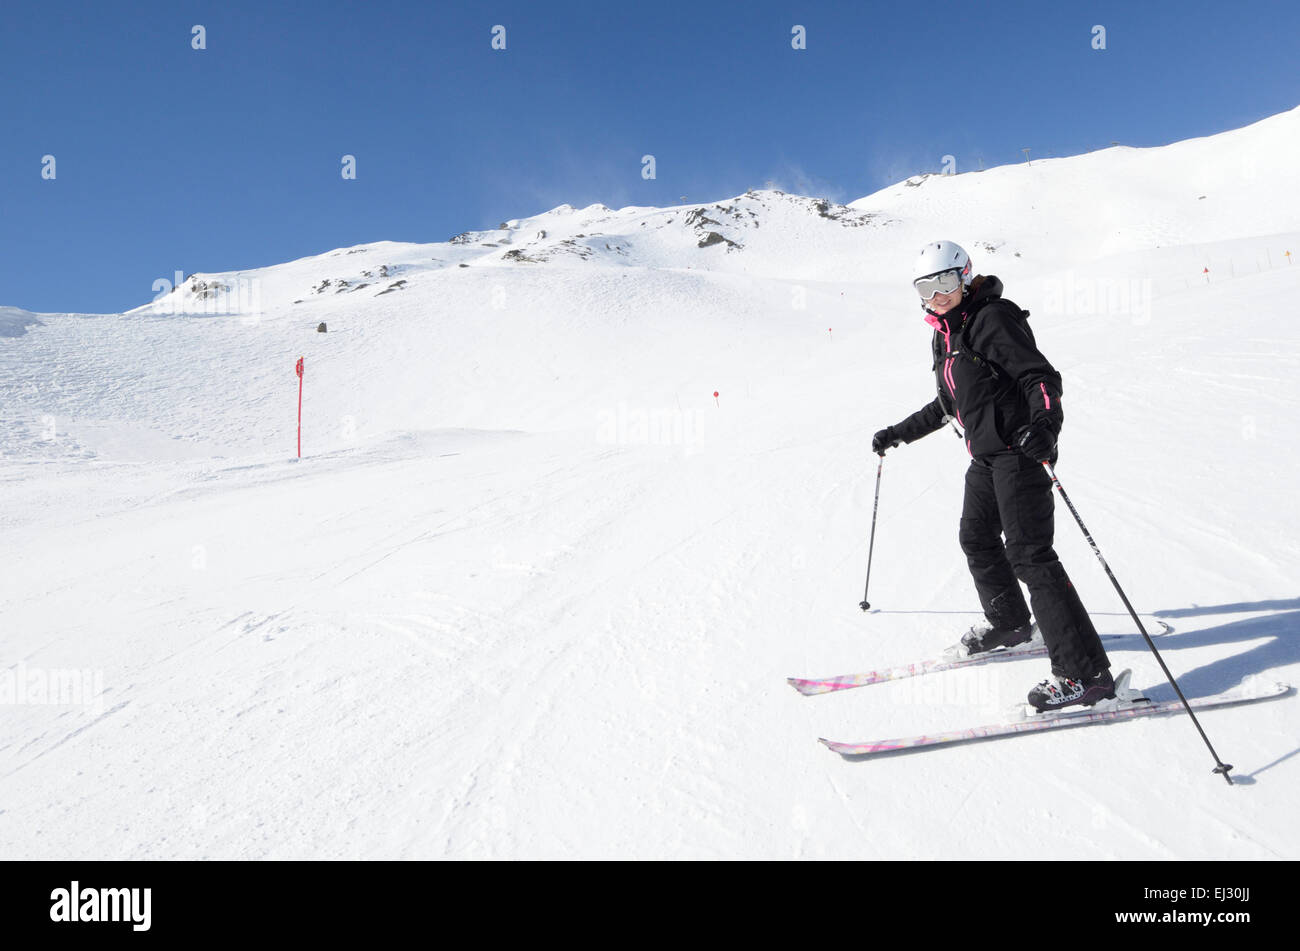 Skier Skiing in warm sunny conditions  Stock Photo